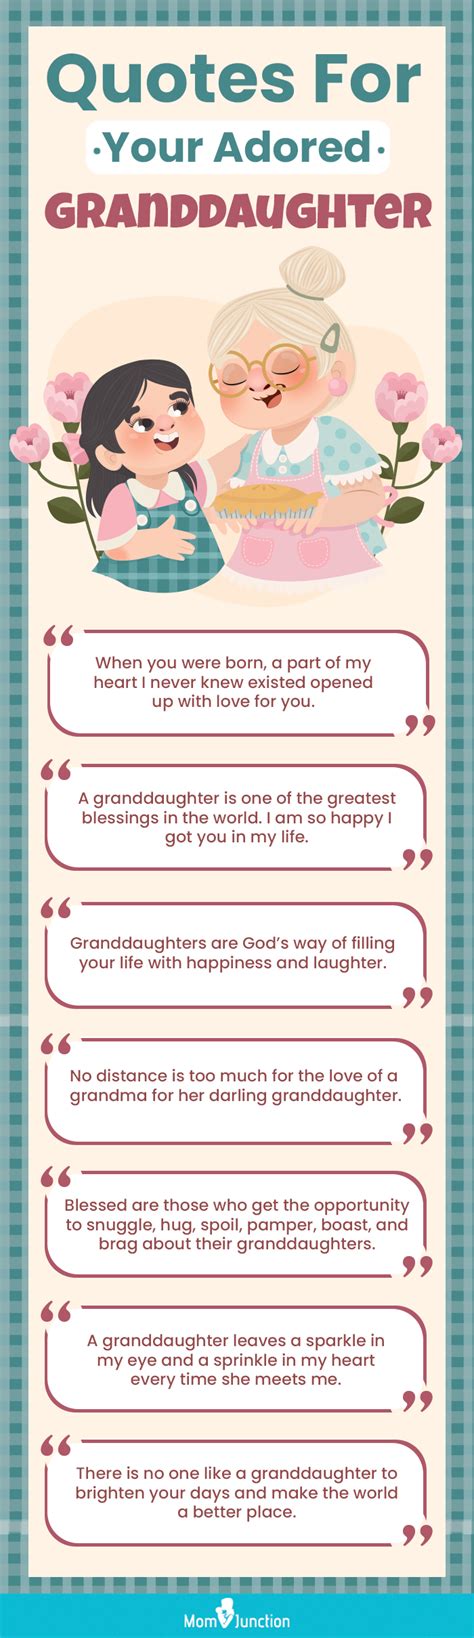 Best Granddaughter Quotes And Sayings